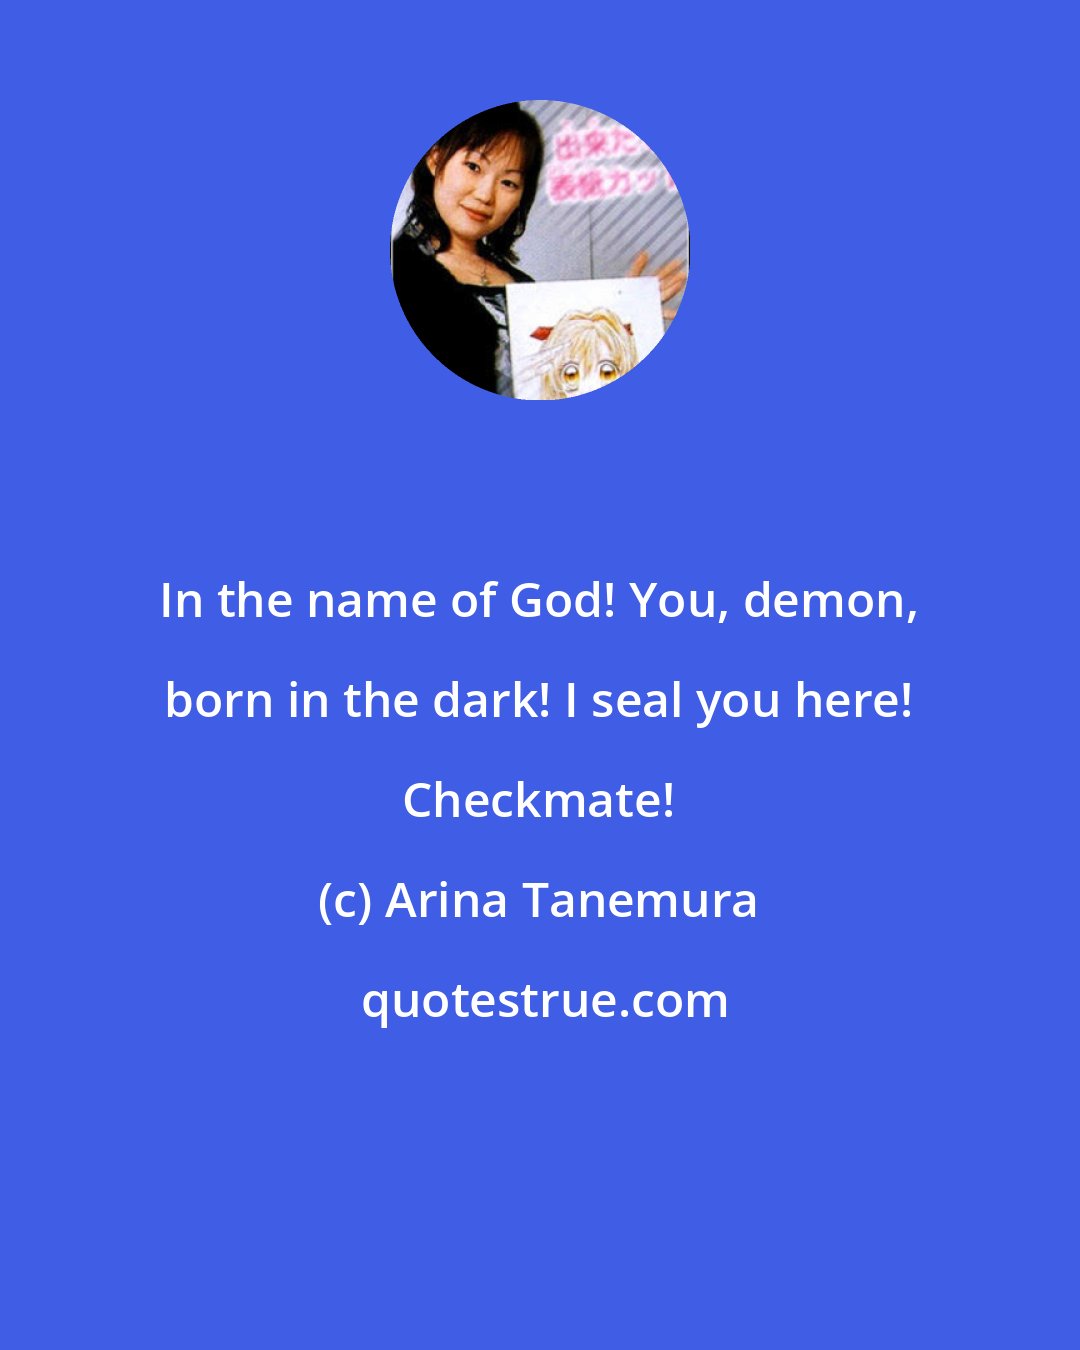 Arina Tanemura: In the name of God! You, demon, born in the dark! I seal you here! Checkmate!